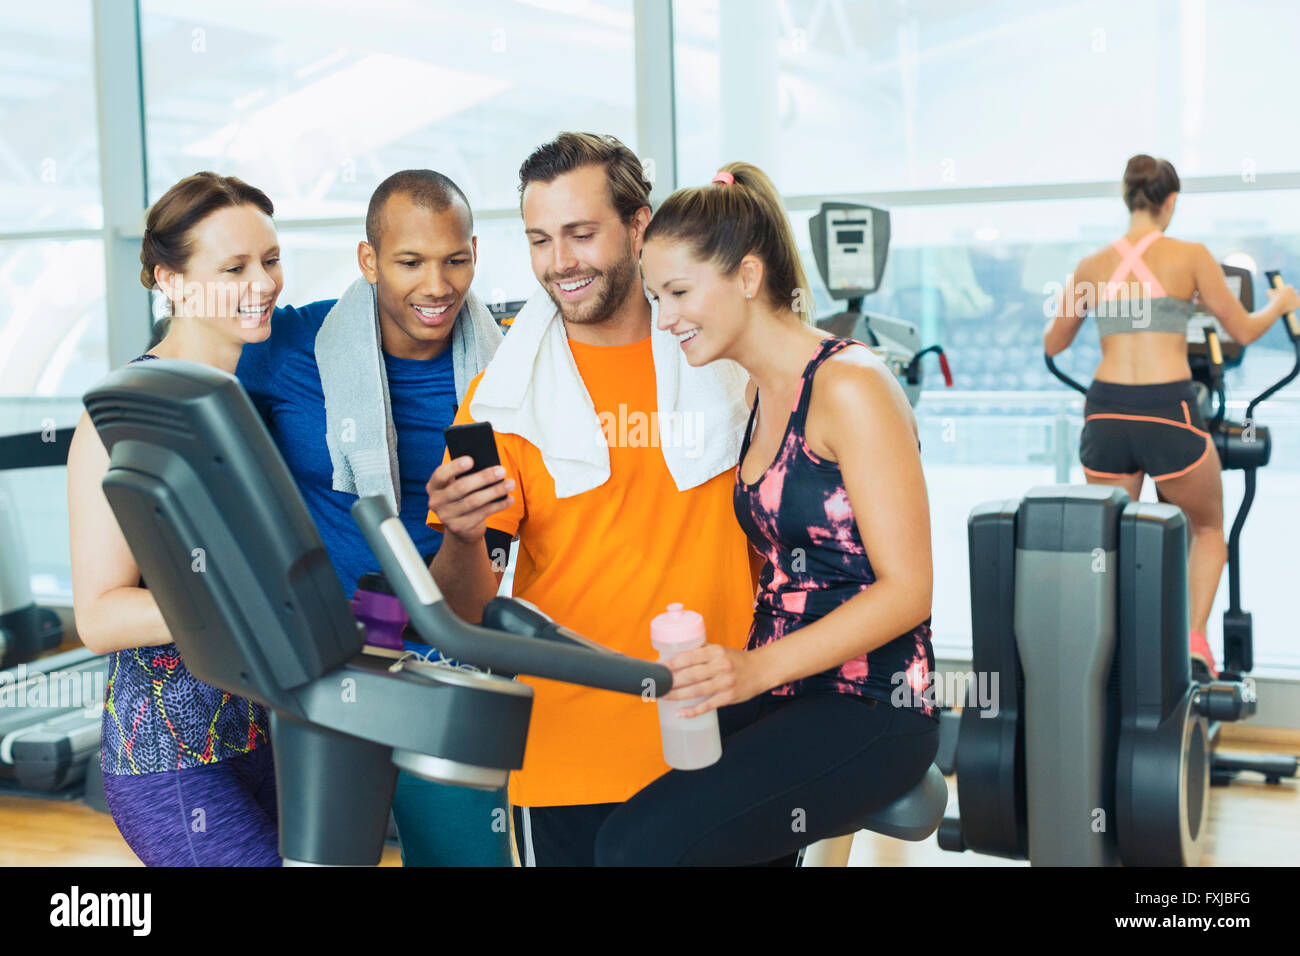 Smiling friends using cell phone at exercise bike in gym Stock Photo